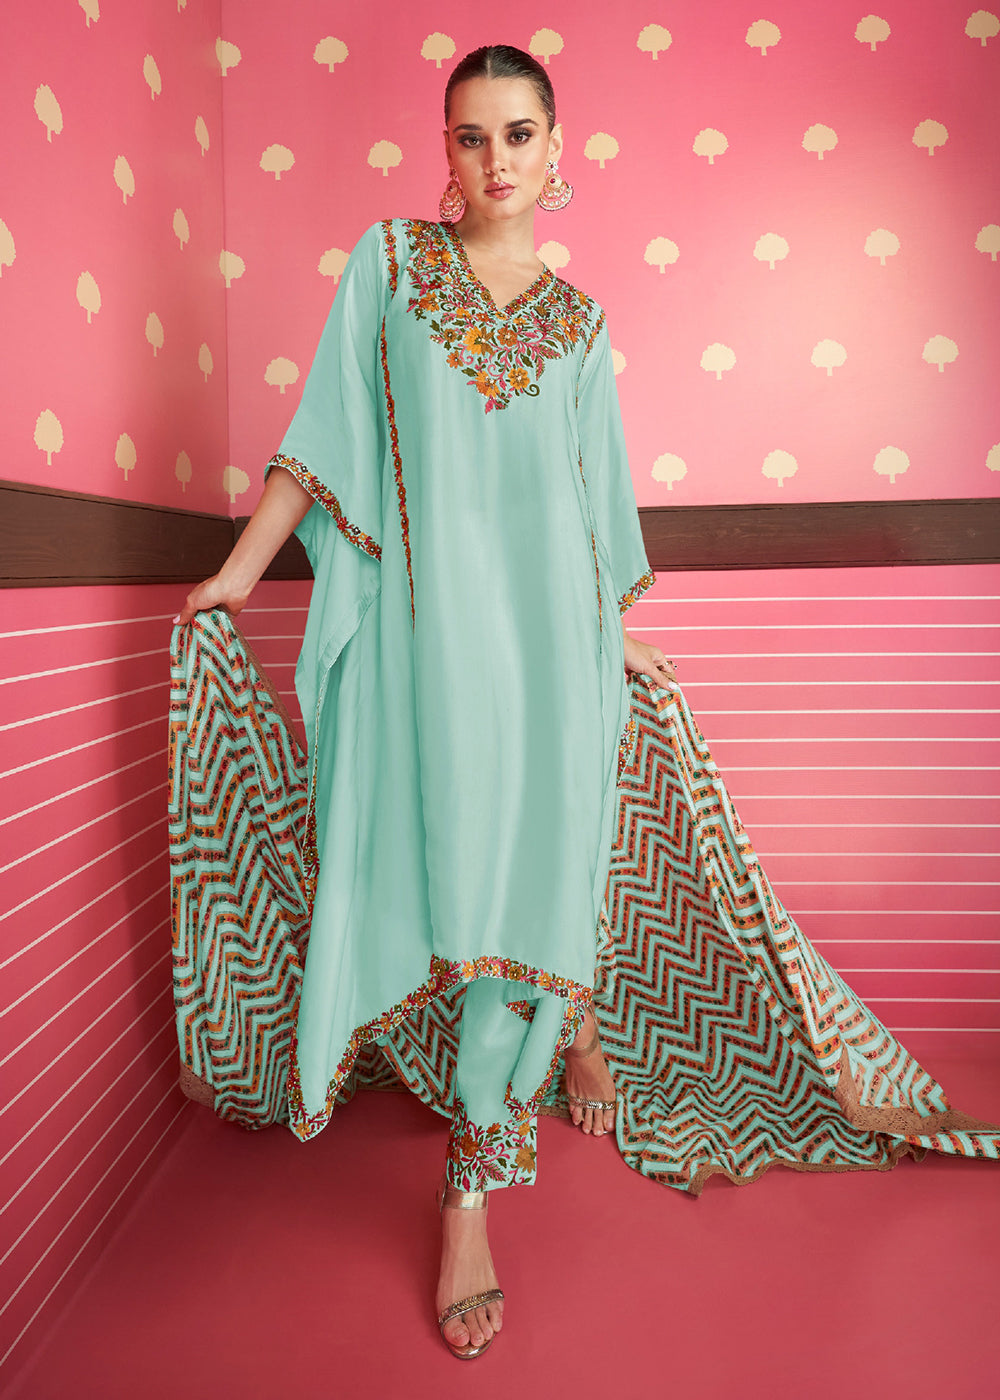 Buy Now Aqua Blue Silk Satin Kaftan Style Pant Style Suit Online in USA, UK, Canada, Germany & Worldwide at Empress Clothing.